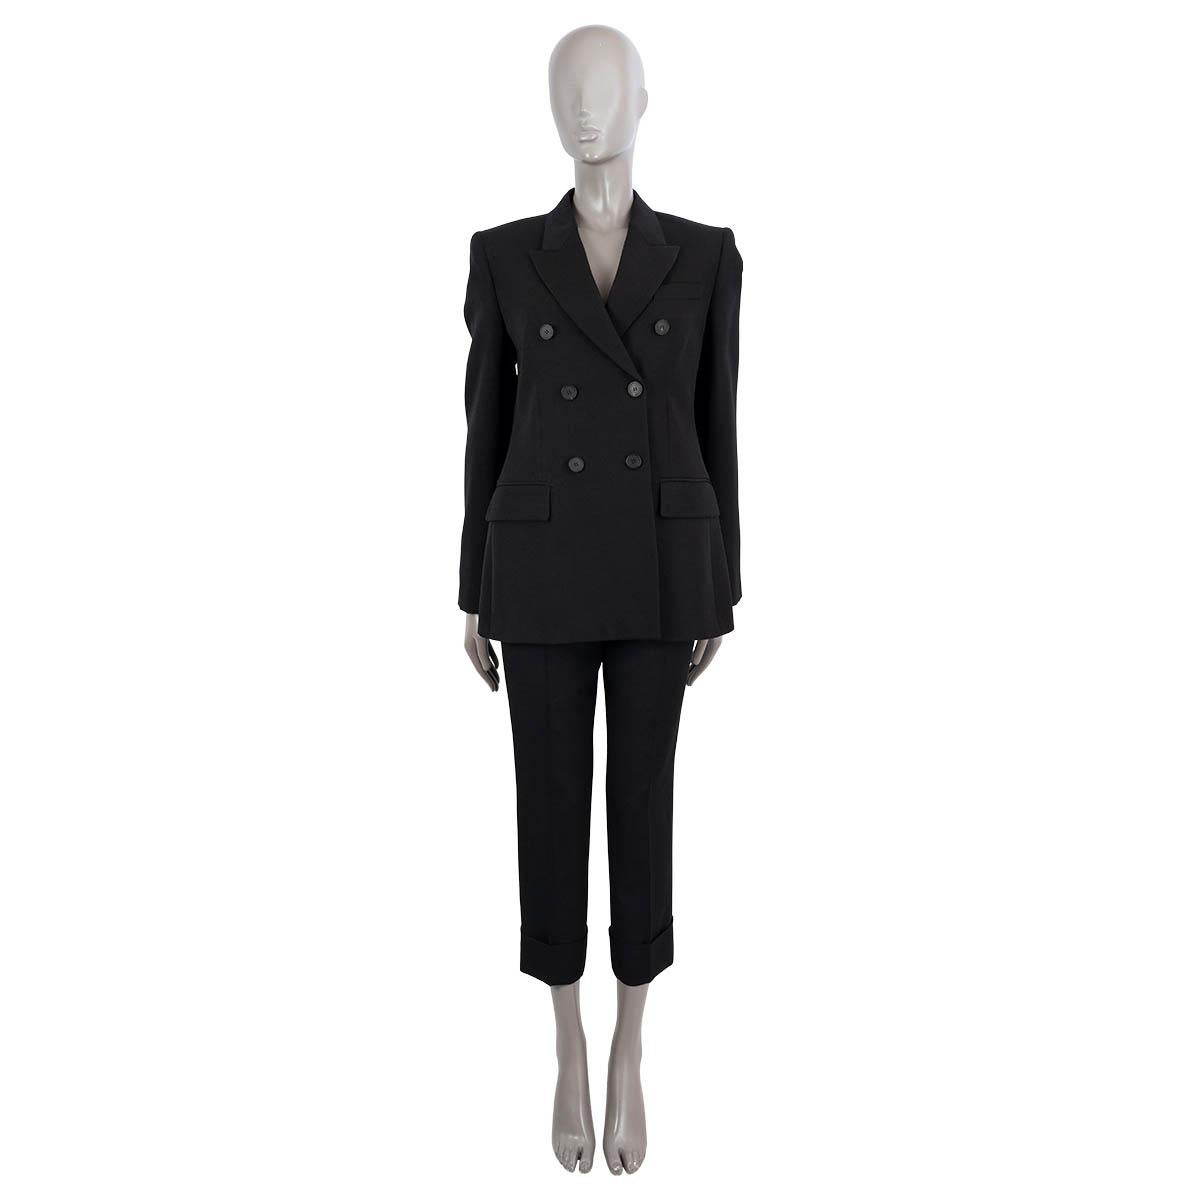 100% authentic Givenchy double-breasted blazer in black gaberdine wool (100%). Features peak lapels, a welt pocket at the check and two flap pockets at the waist. Closes with horn buttons and is lined in cupro (100%). Has been worn and is in